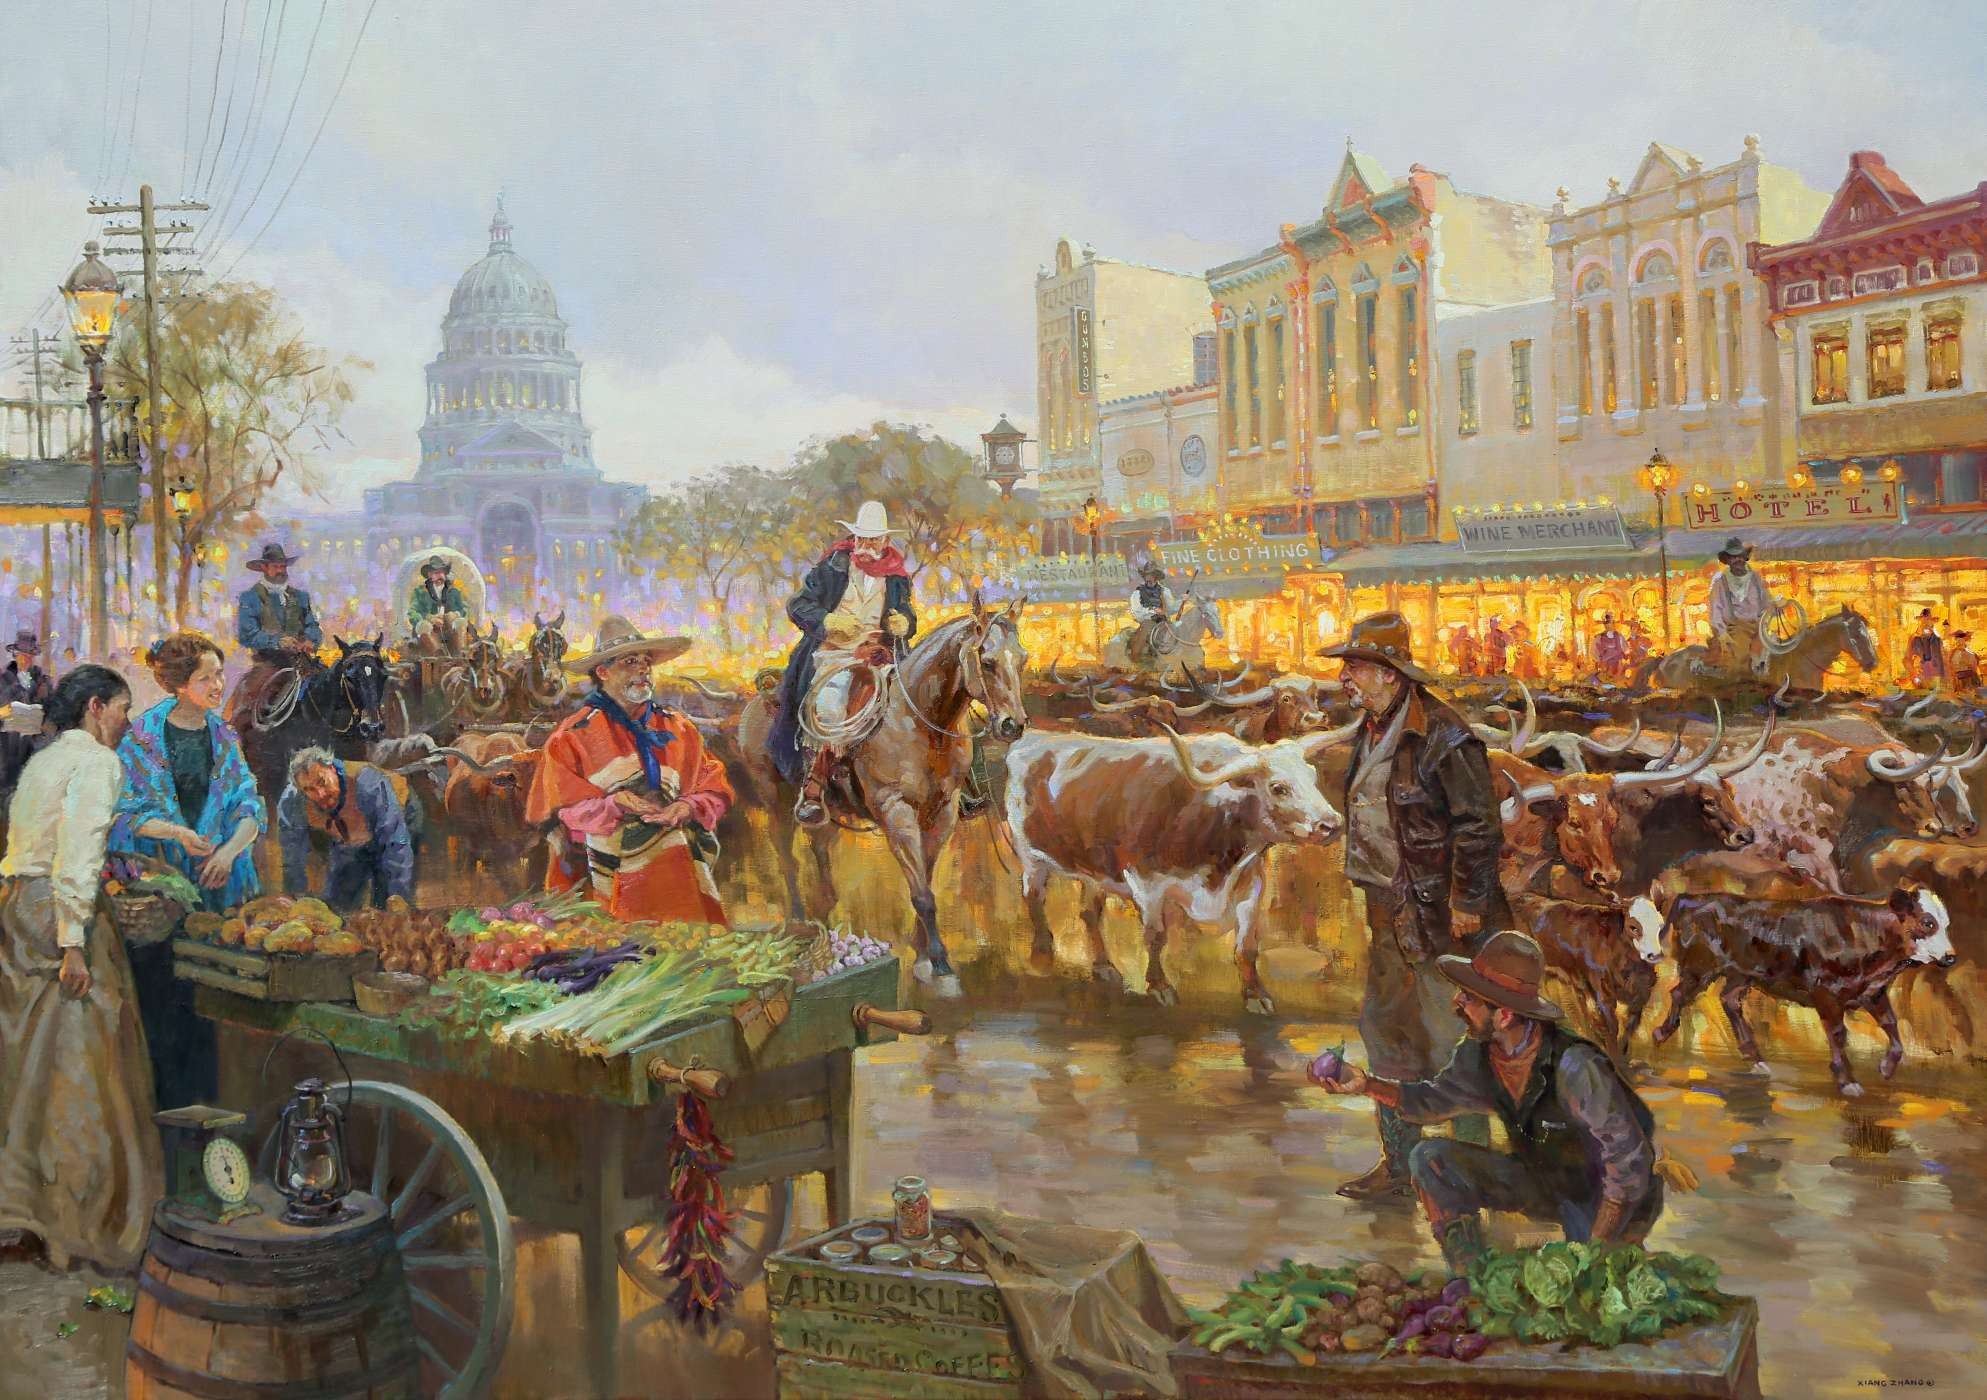 Western Oil Paintings by Xiang Zhang